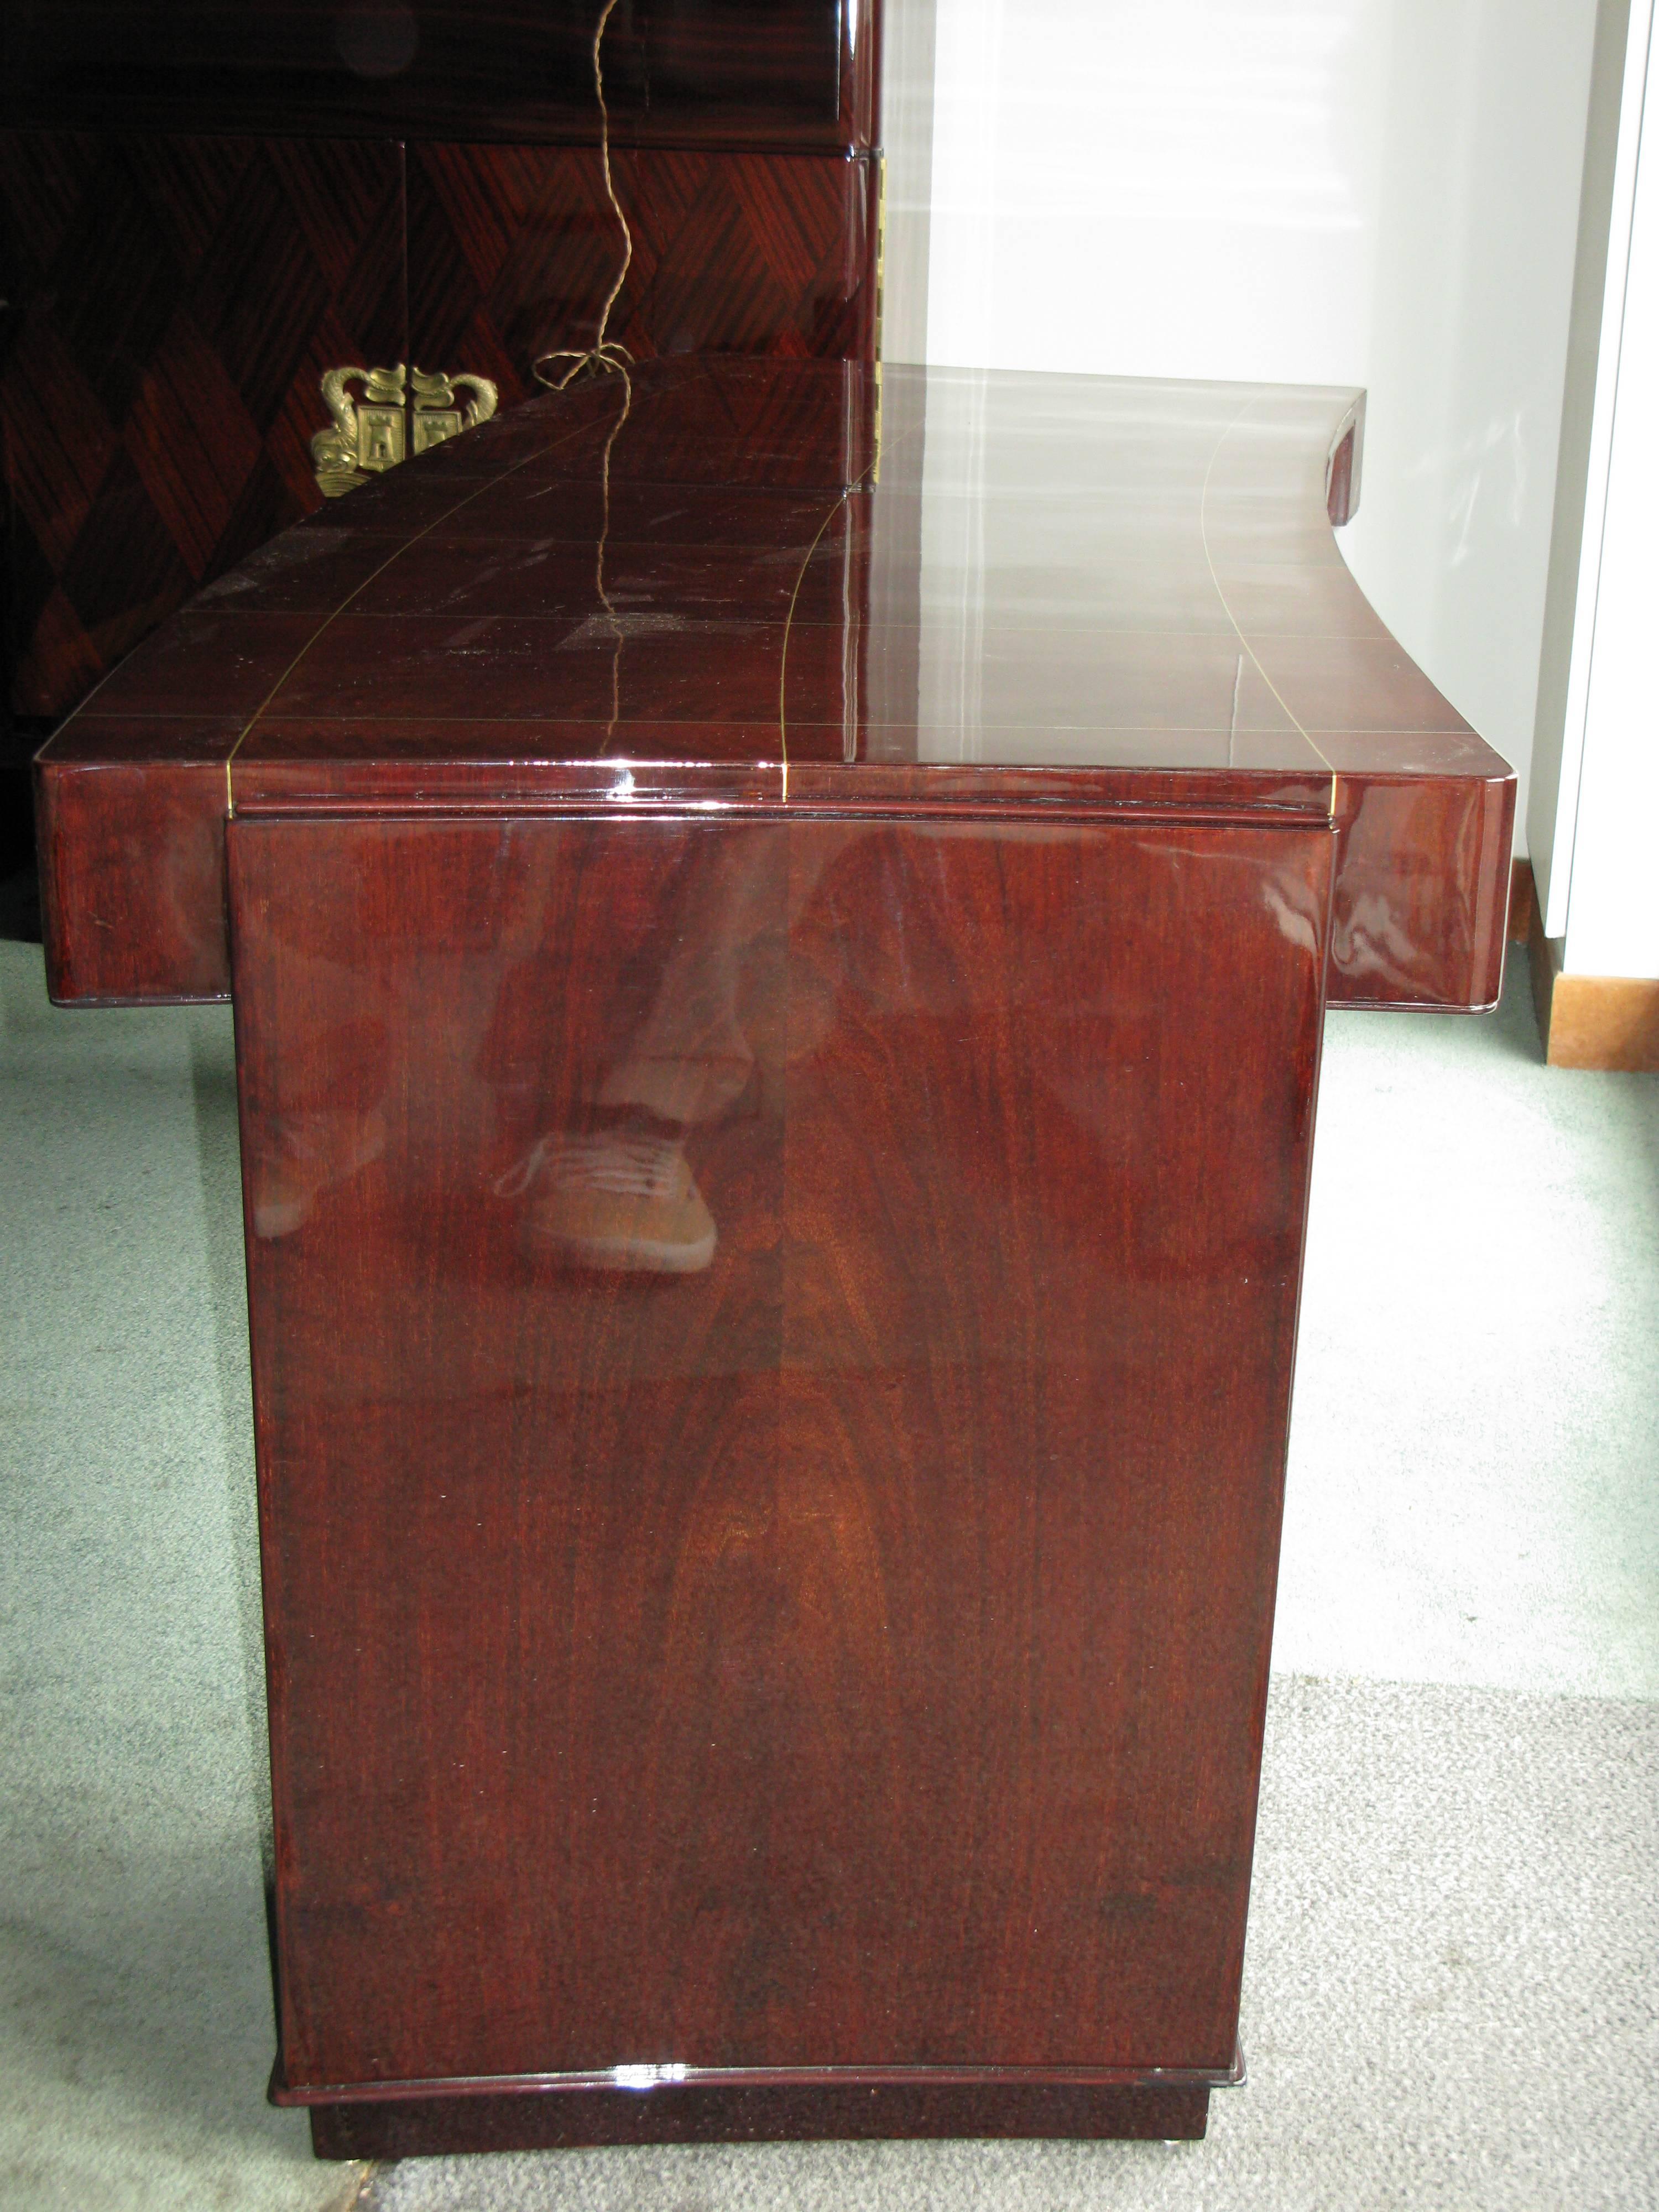 Desk in Rio rosewood with brass filets inlaids on top.
Top slightly curved and both sides are concave.
There are two drawers in the belt and two side blocks opening with a door, showing oak shelves on both sides.
Art Deco French work, circa 1935